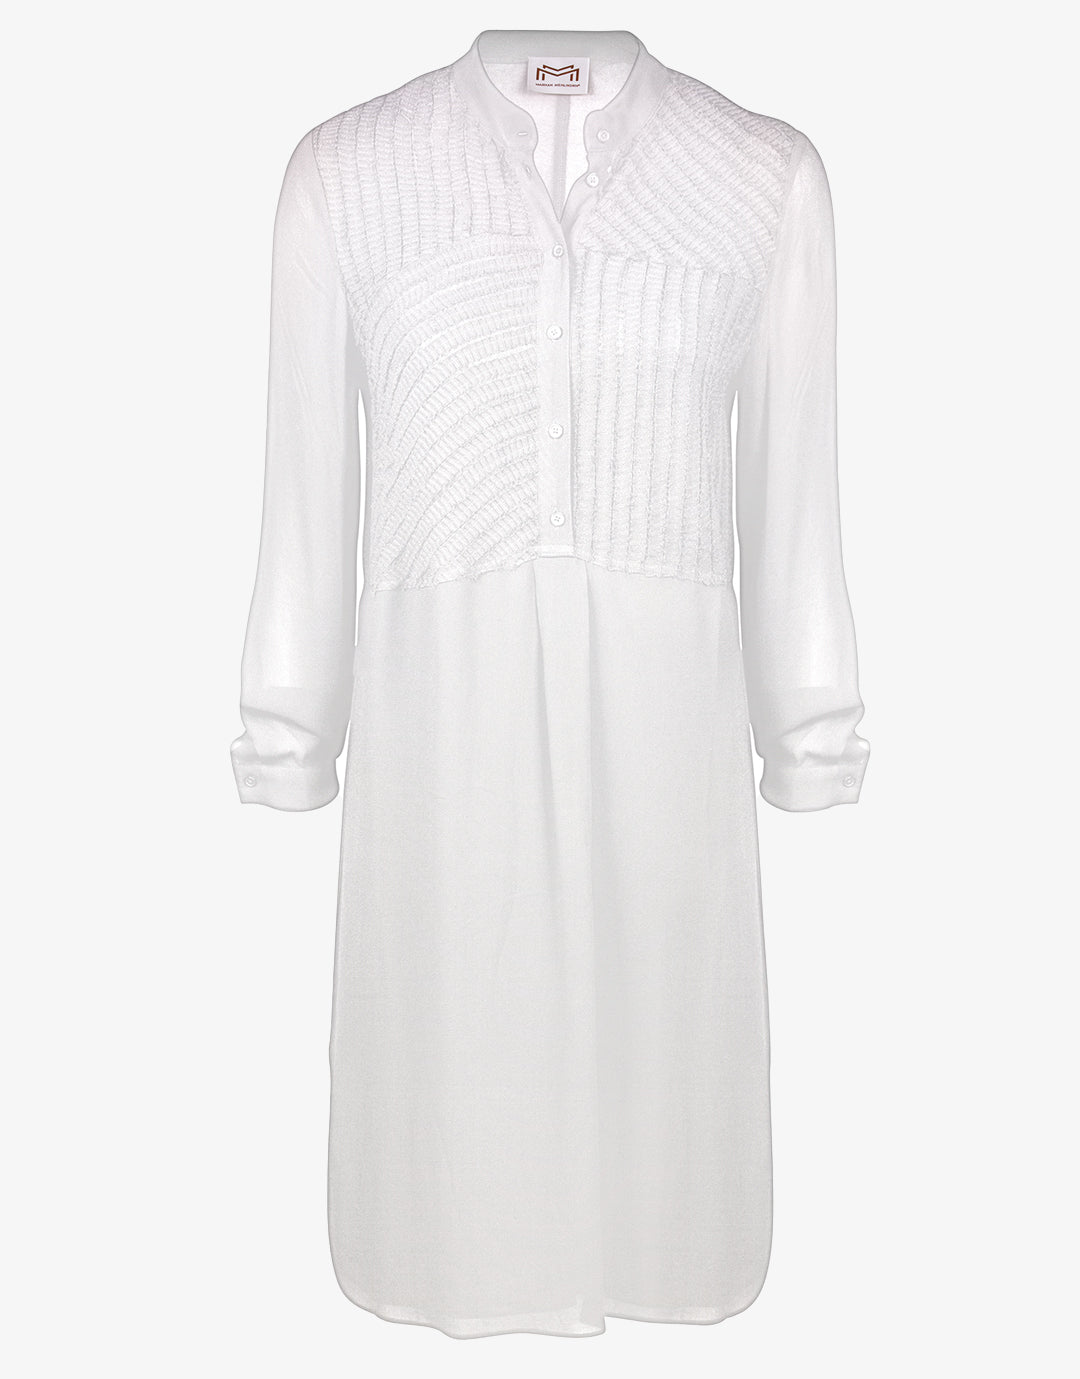 Buttoned Tunic - White - Simply Beach UK